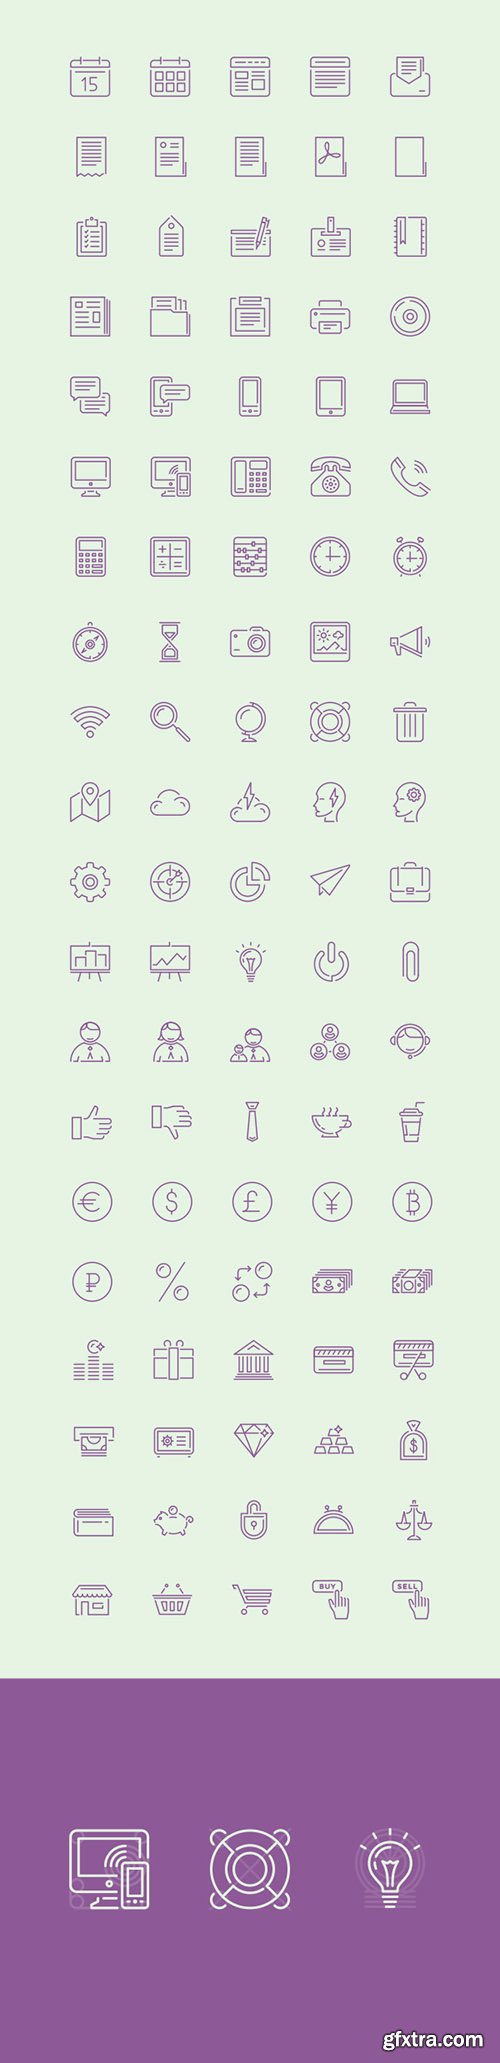 AI, EPS, PDF Vector Web Icons - Puppets - 100 Stroke Icons 2015